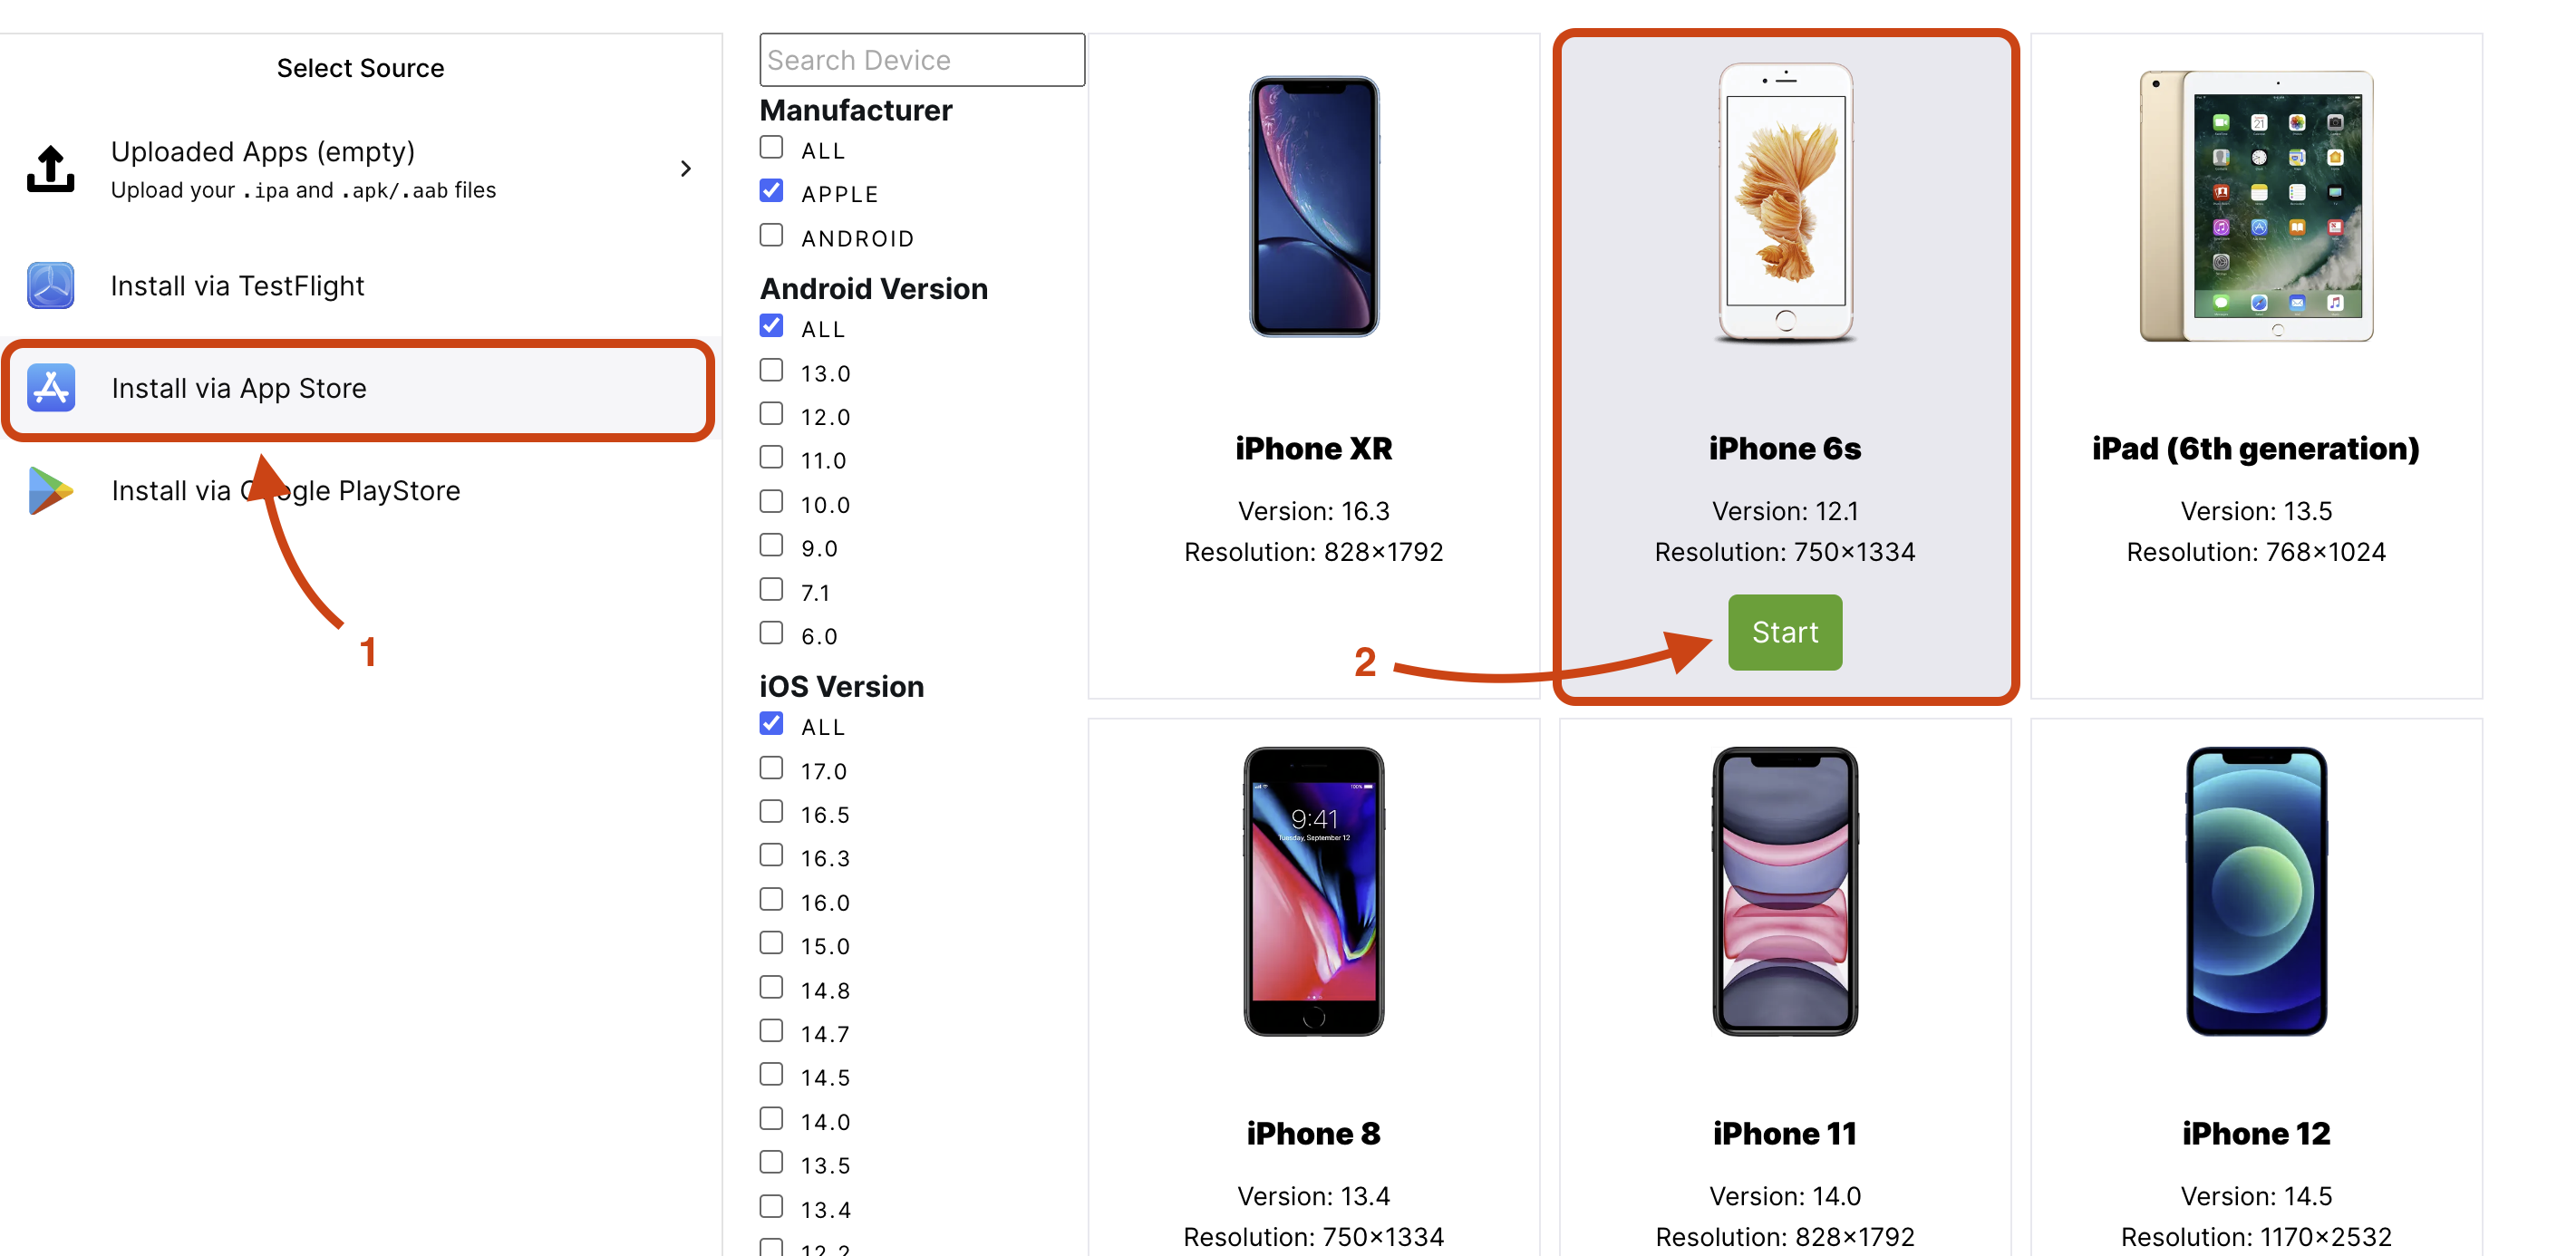 How to choose a device to install it via the App Store in Mobile App Tester.